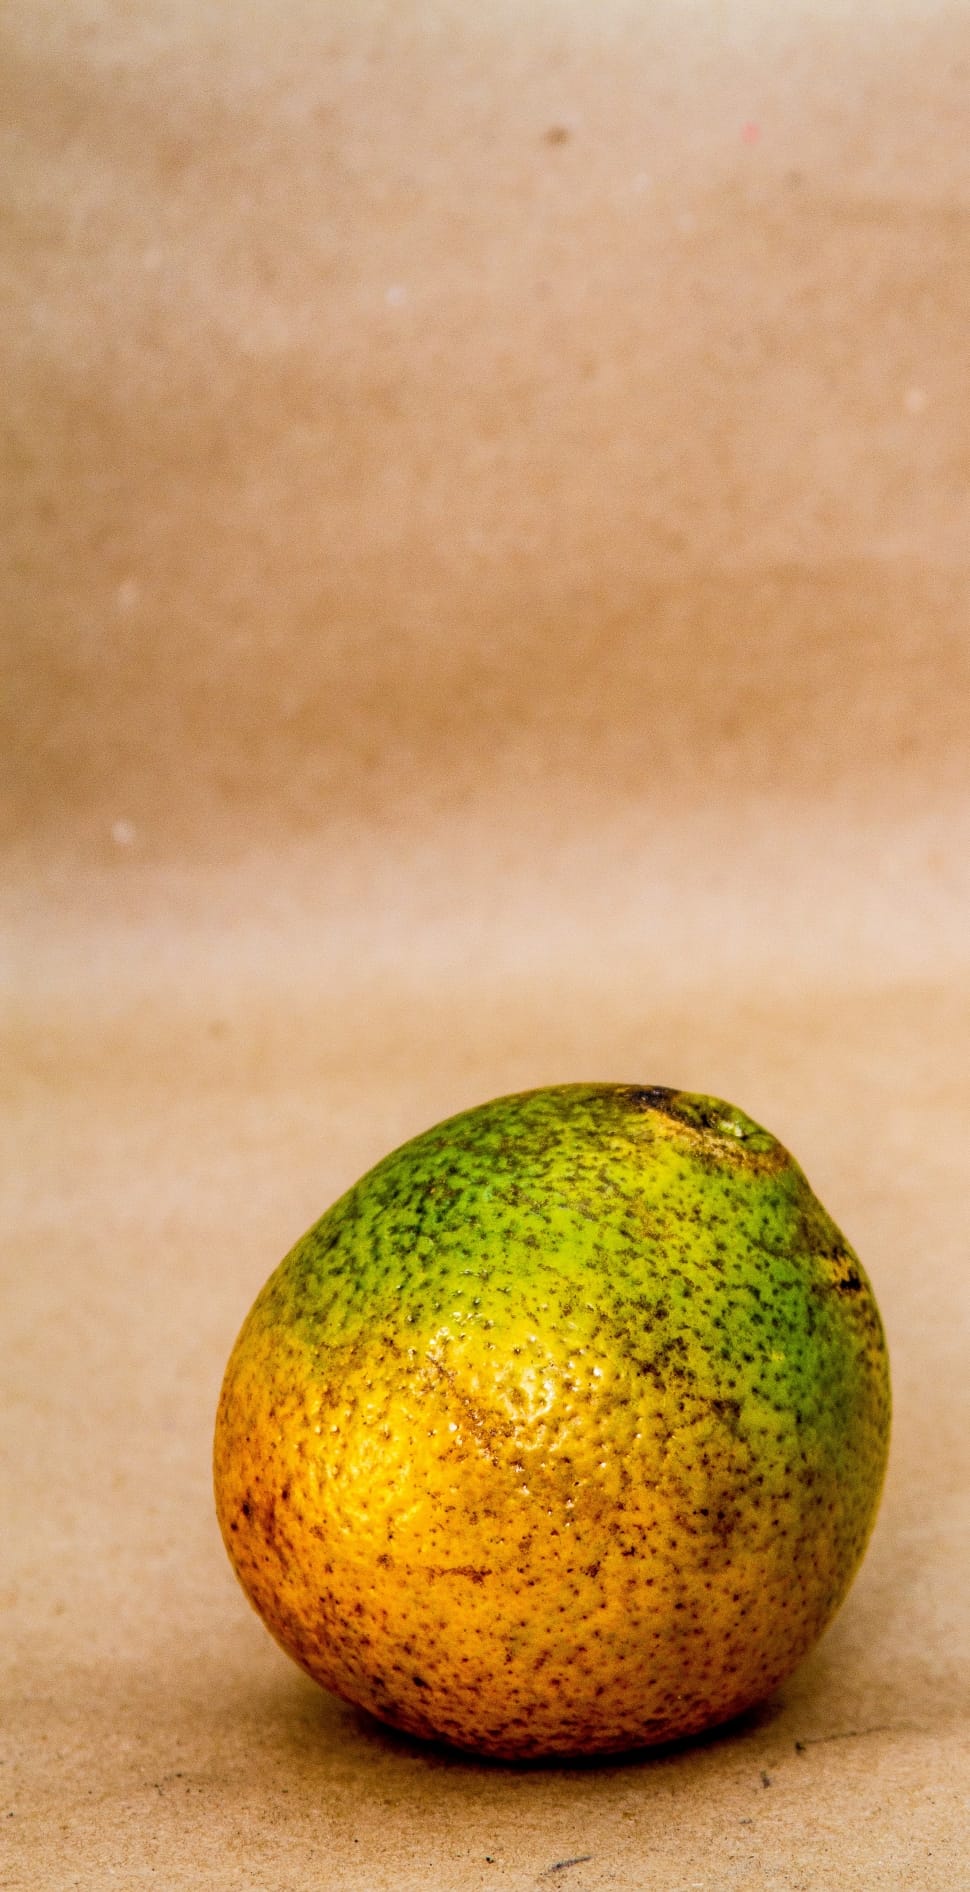 green and yellow round citrus fruit preview